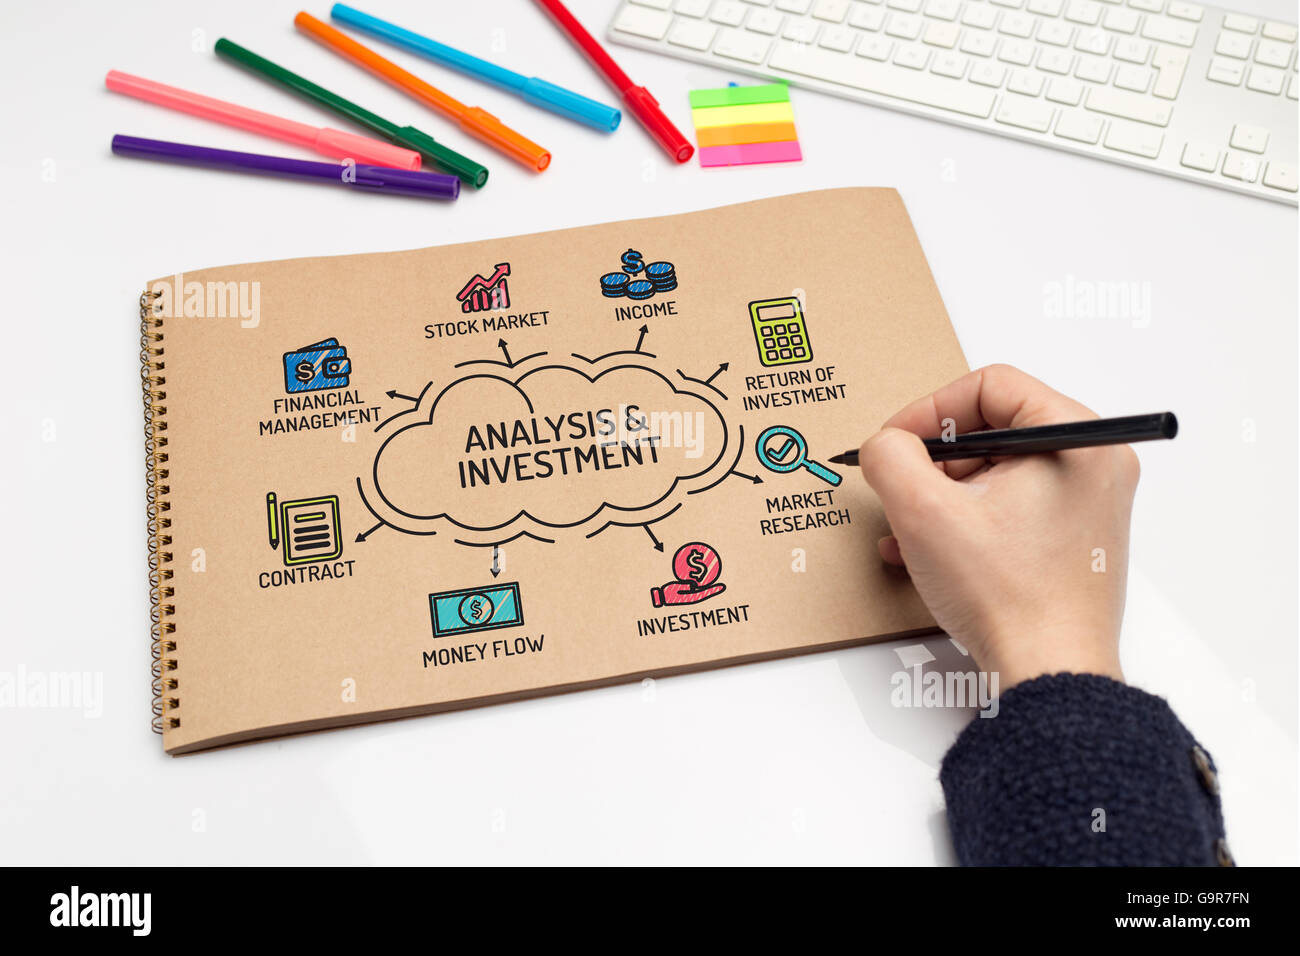 Analysis and Investment chart with keywords and sketch icons Stock Photo